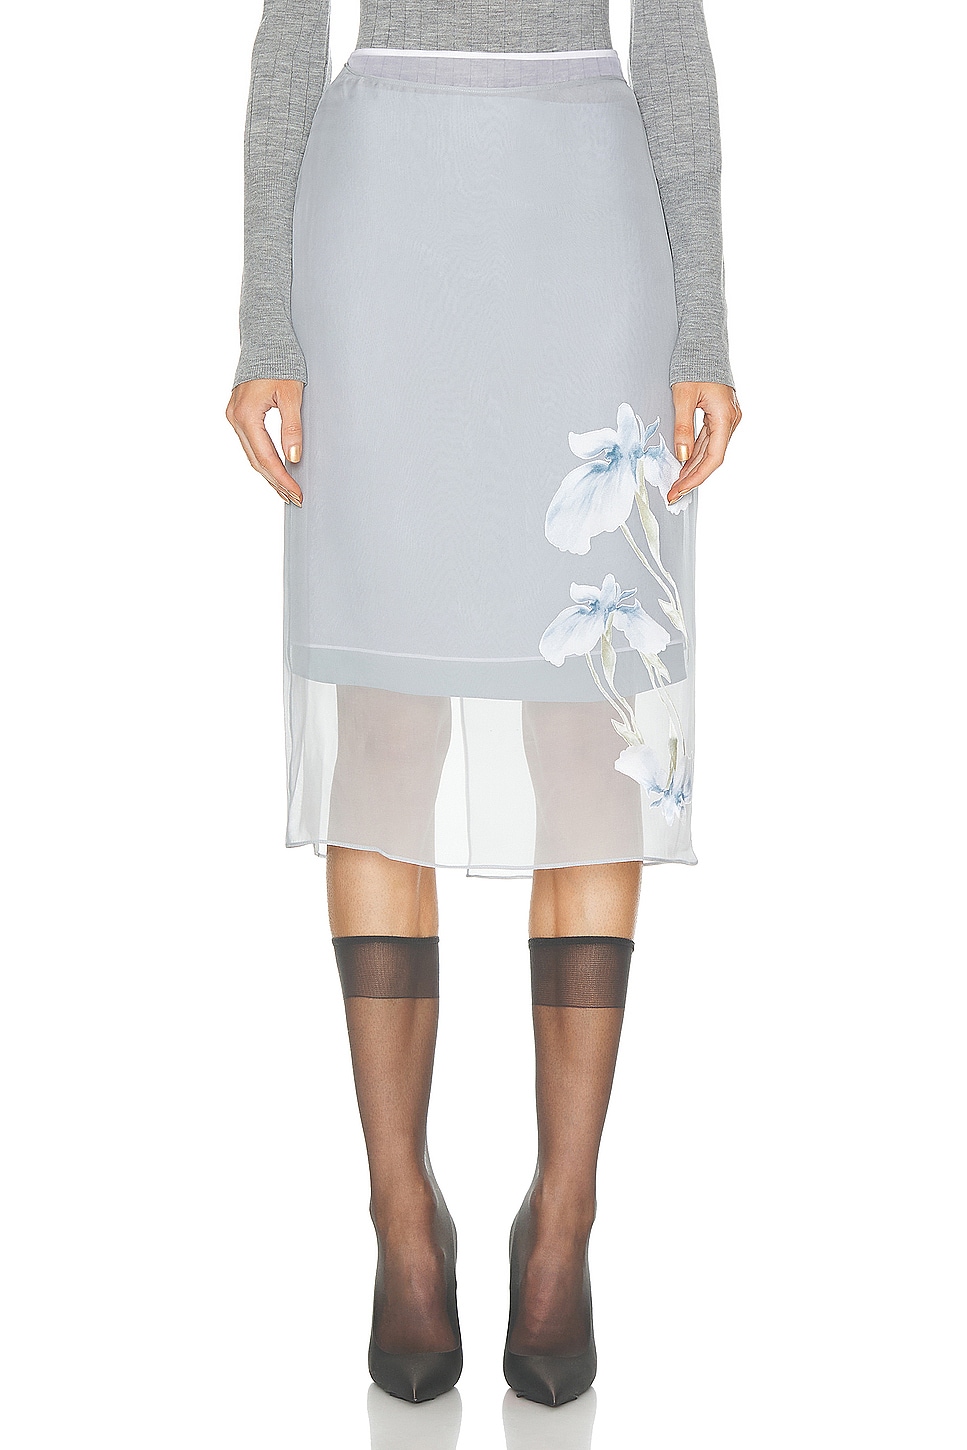 Image 1 of Givenchy Iris Skirt in Ice Blue